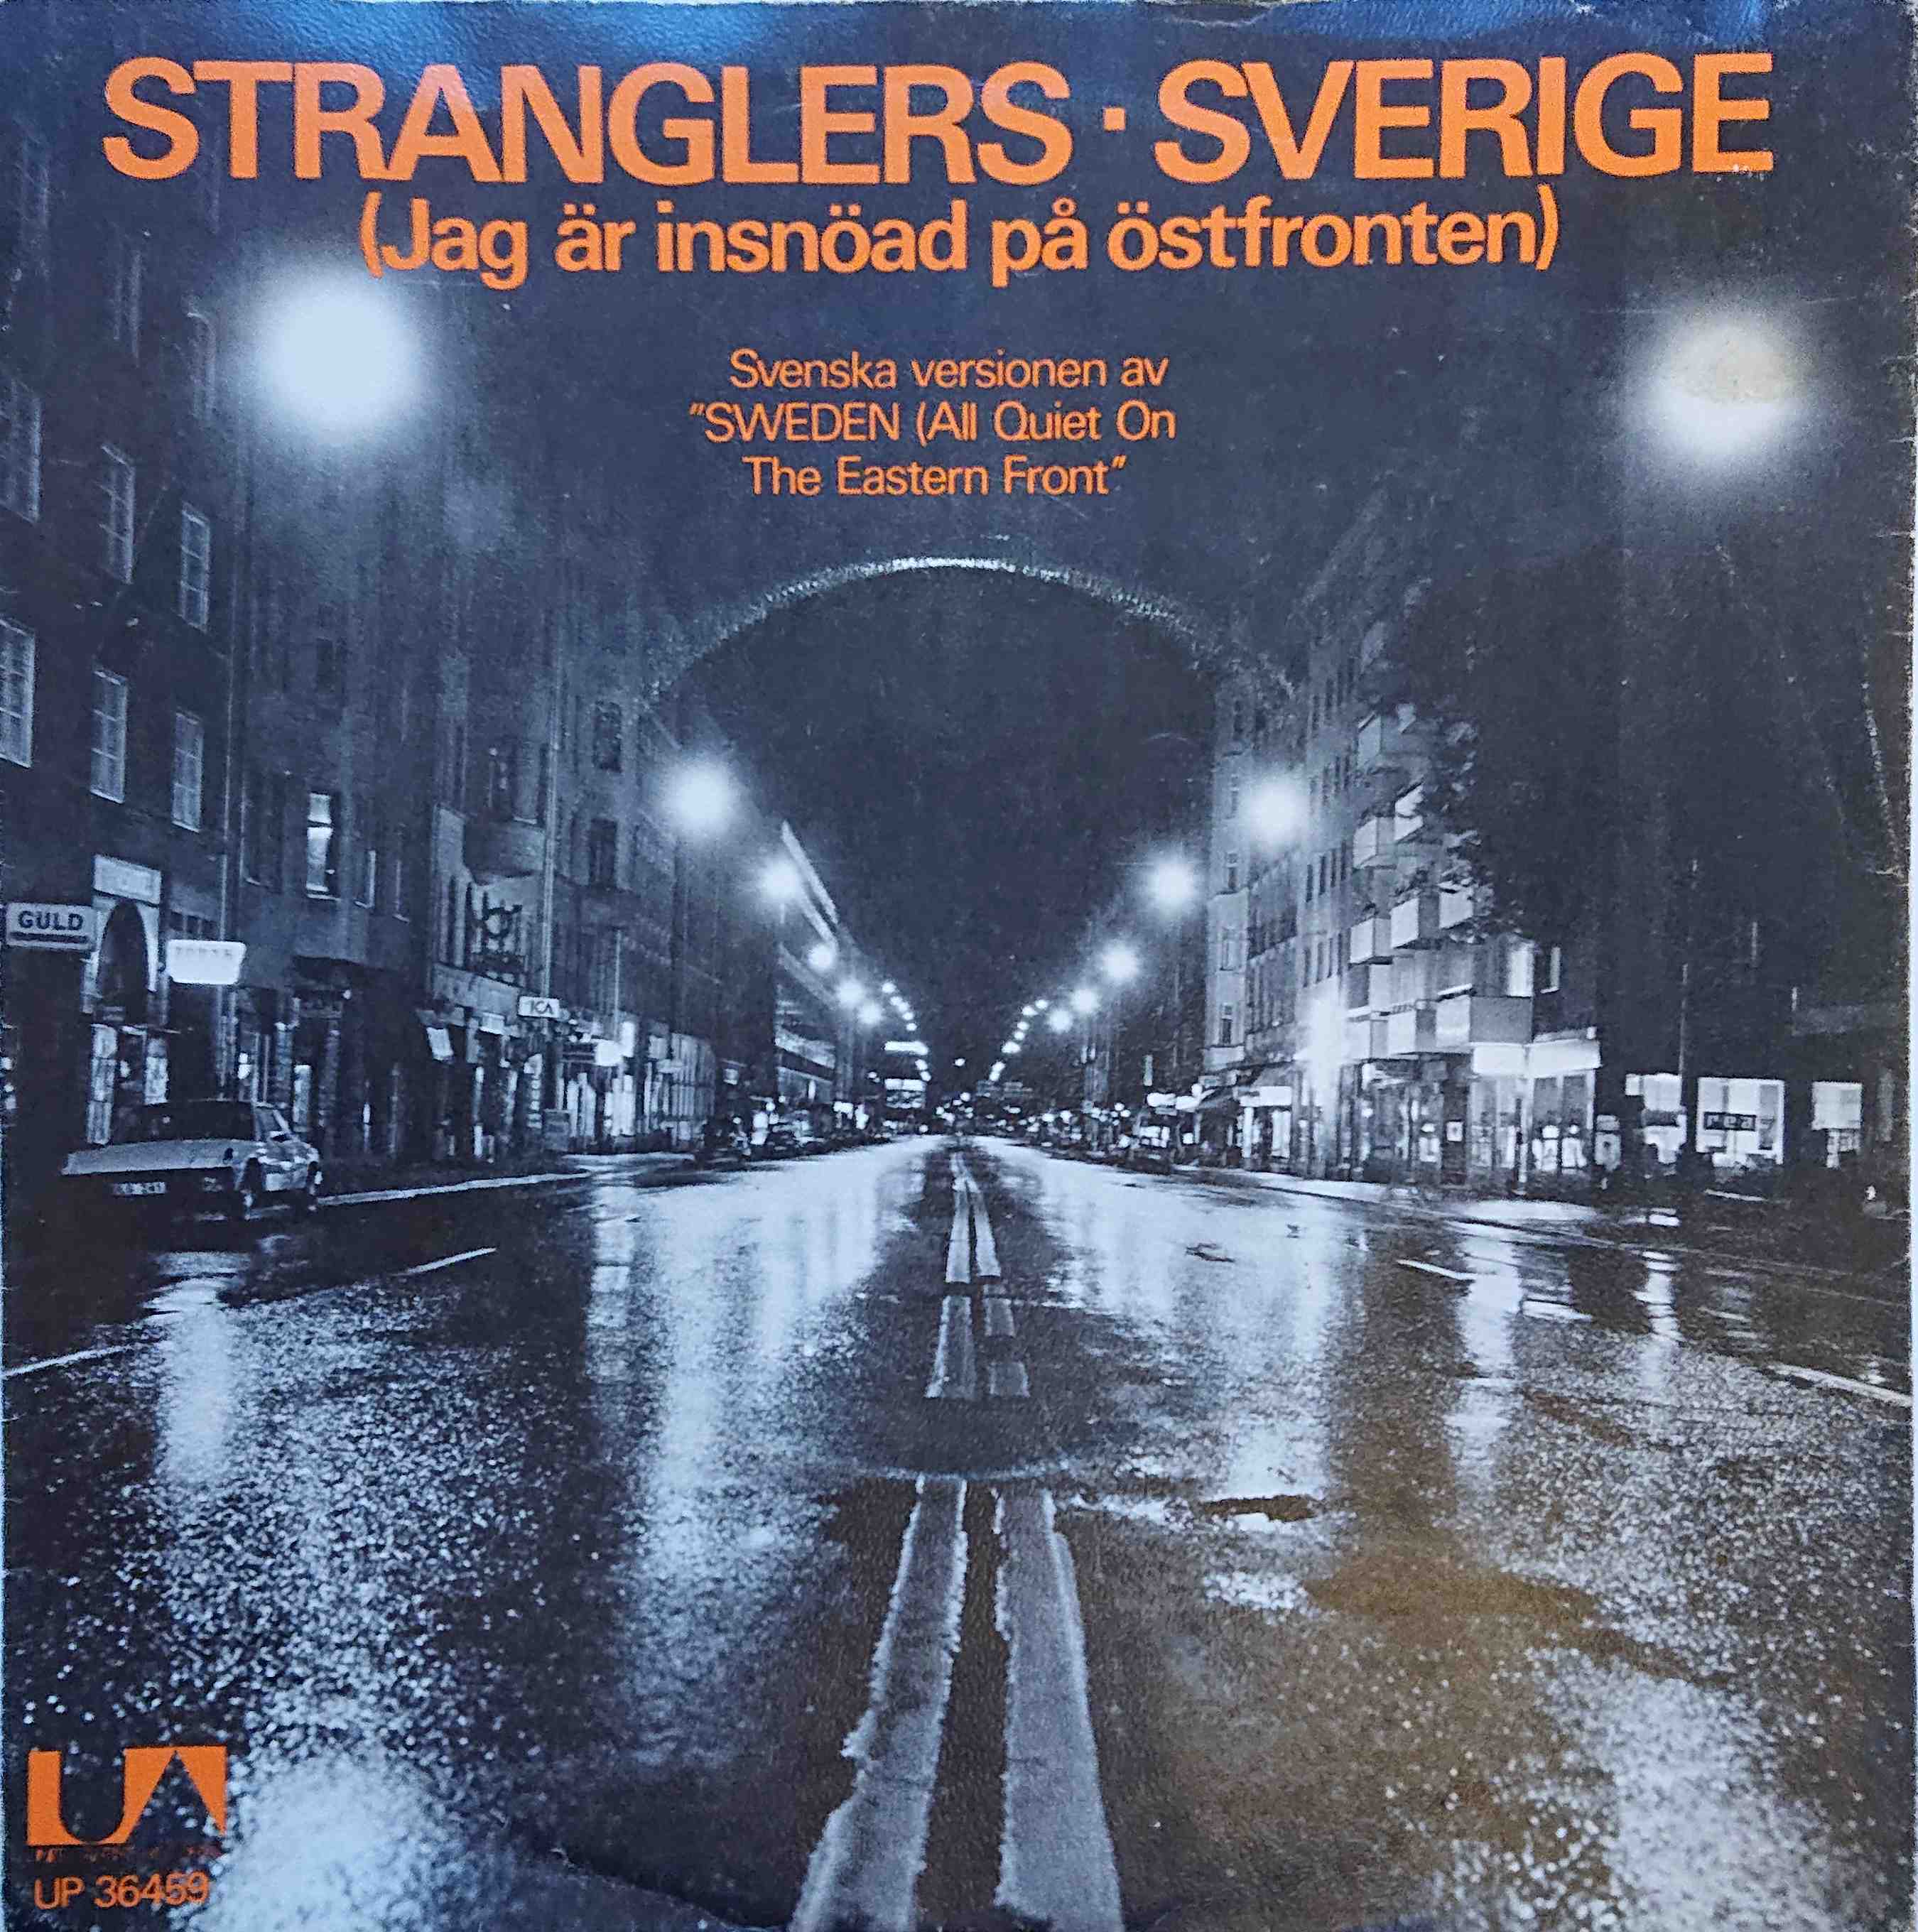 Picture of Sverige by artist The Stranglers  from The Stranglers singles